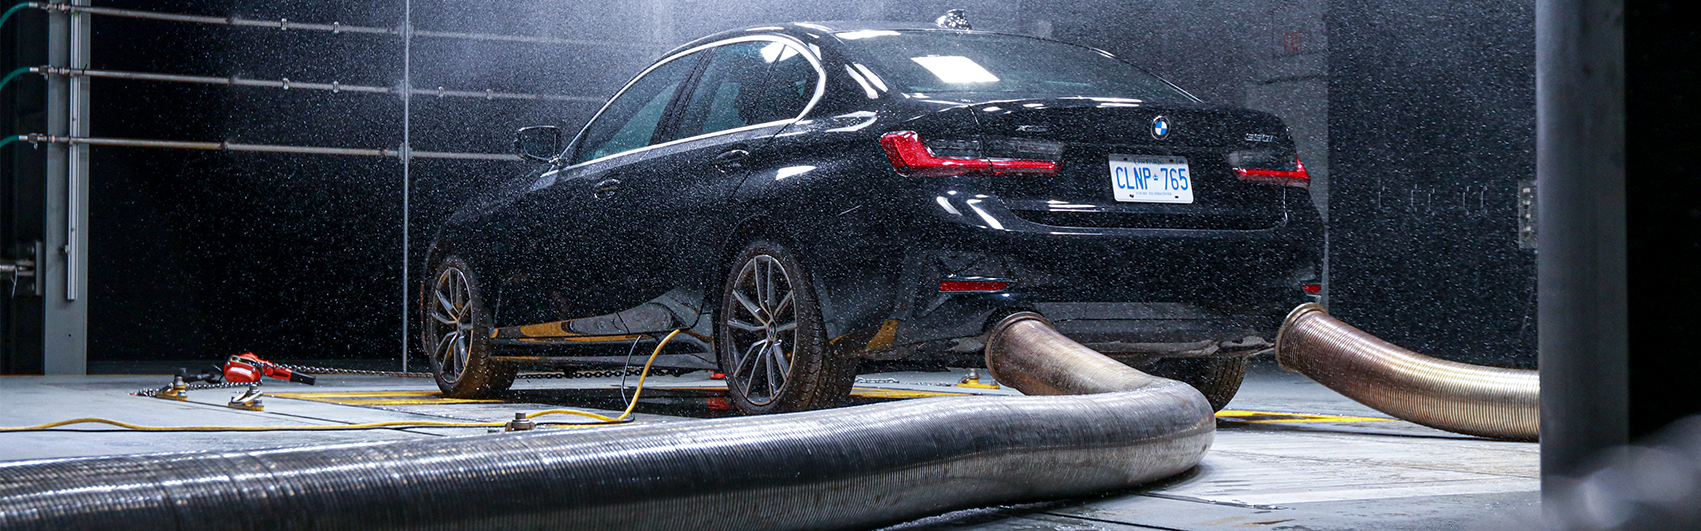 Exhaust Extraction System displayed using BMW in rainy Climatic Aerodynamic Wind Tunnel